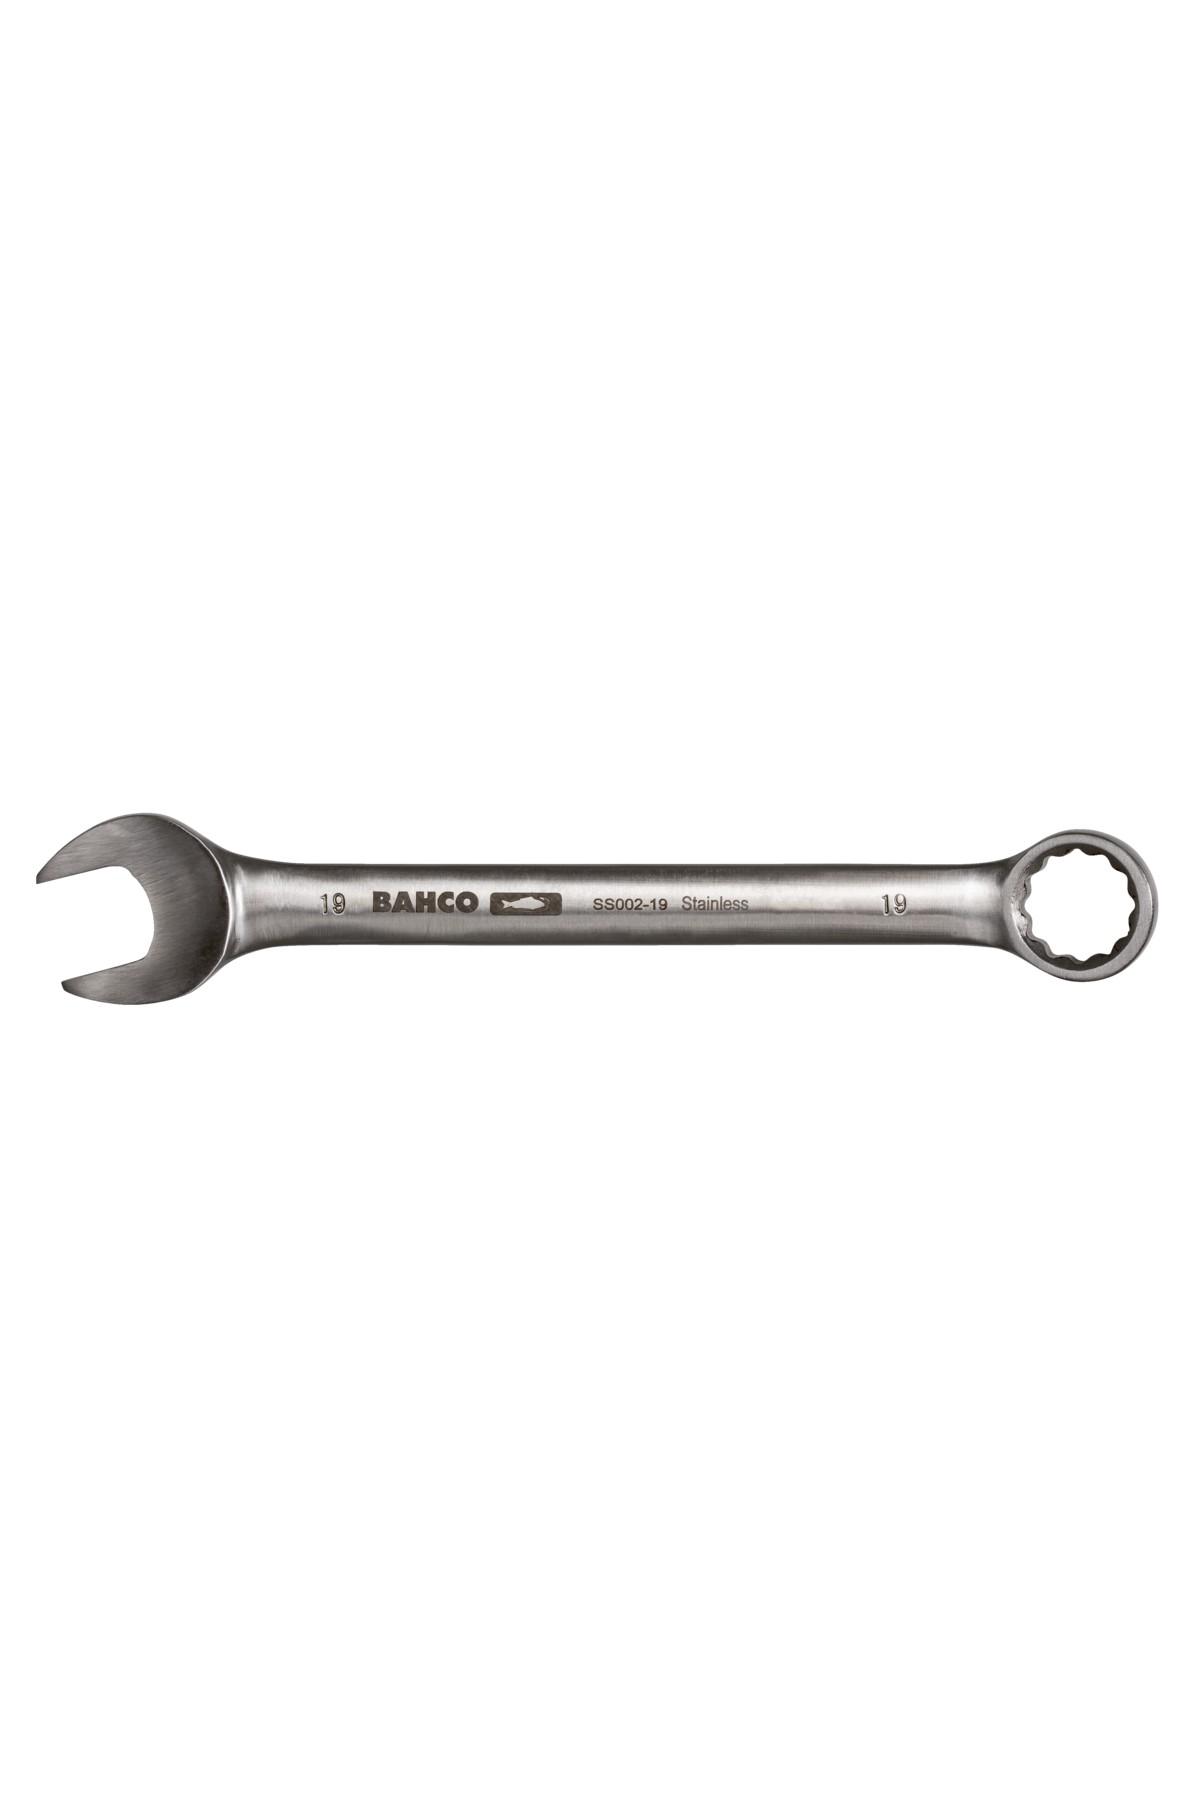 Ring spanner stainless steel SS003 13/16